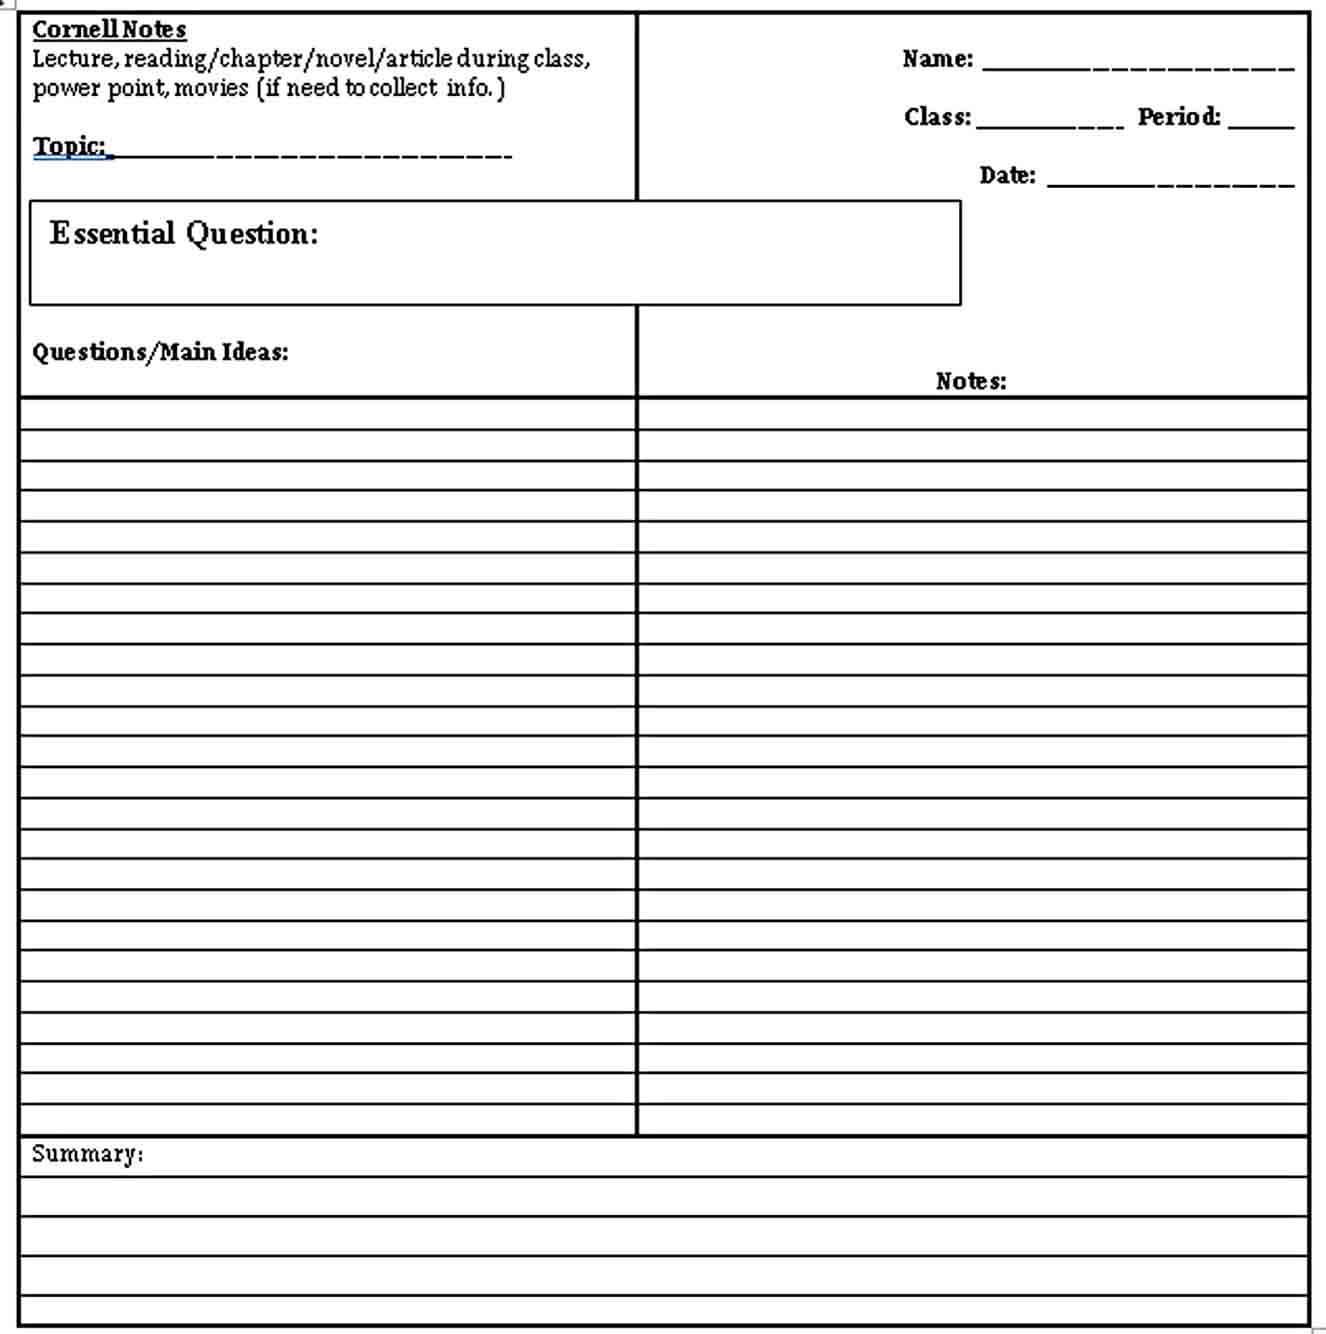 Blank Cornell Note Template